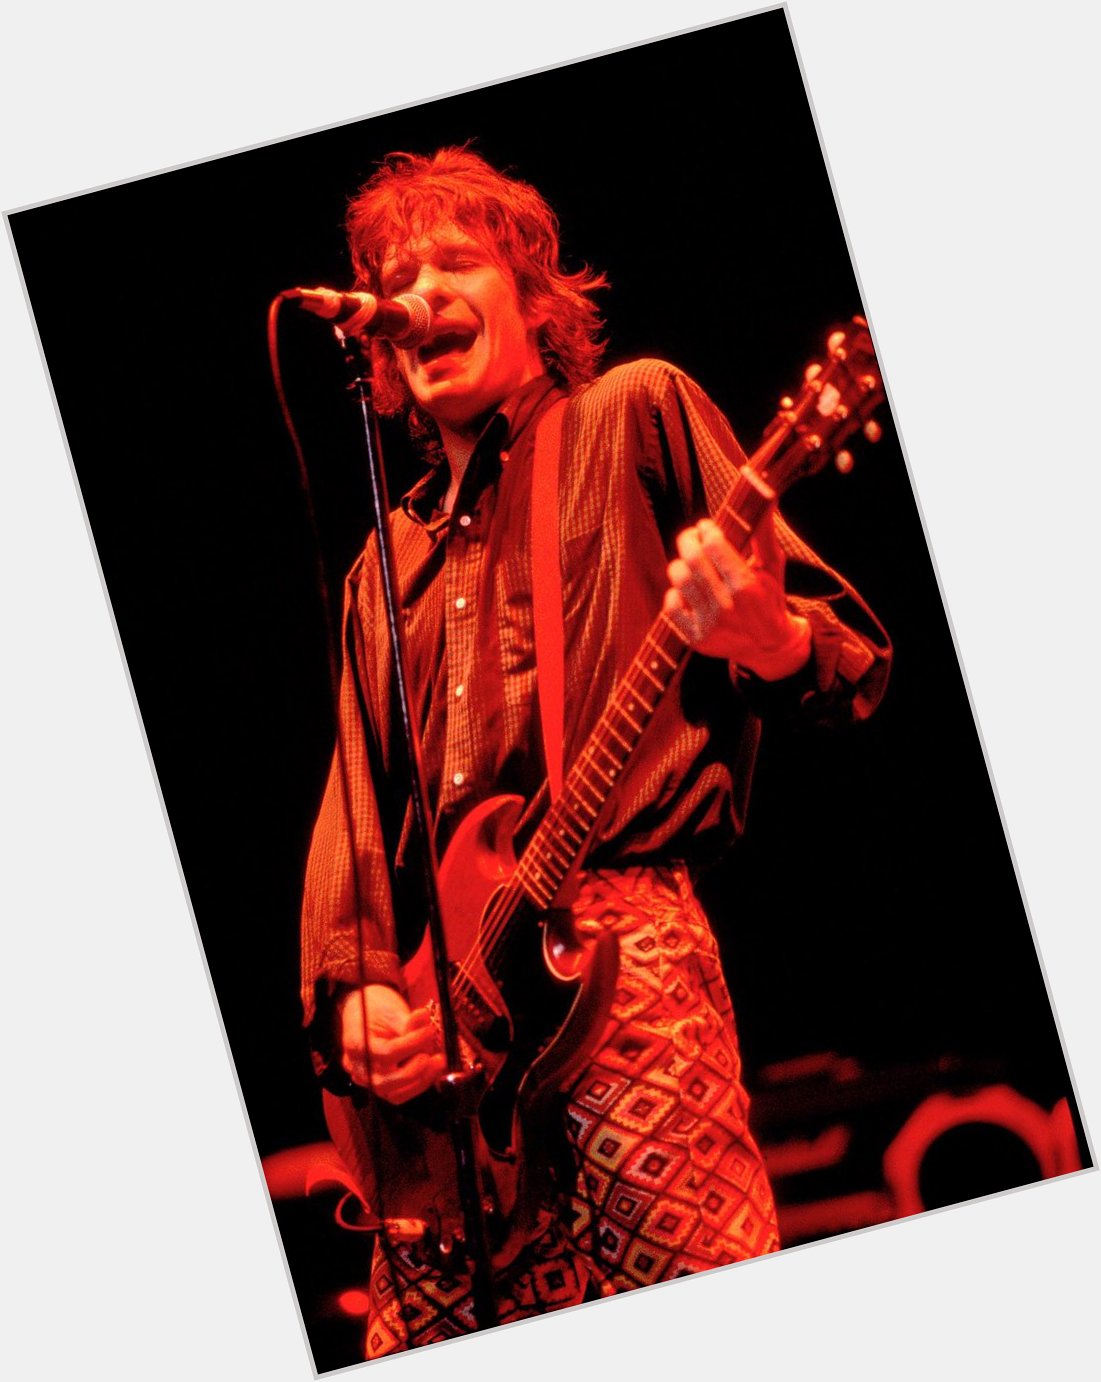 Happy Birthday to Paul Westerberg, seen here performing at the Riviera Theatre on October 15, 1993. 